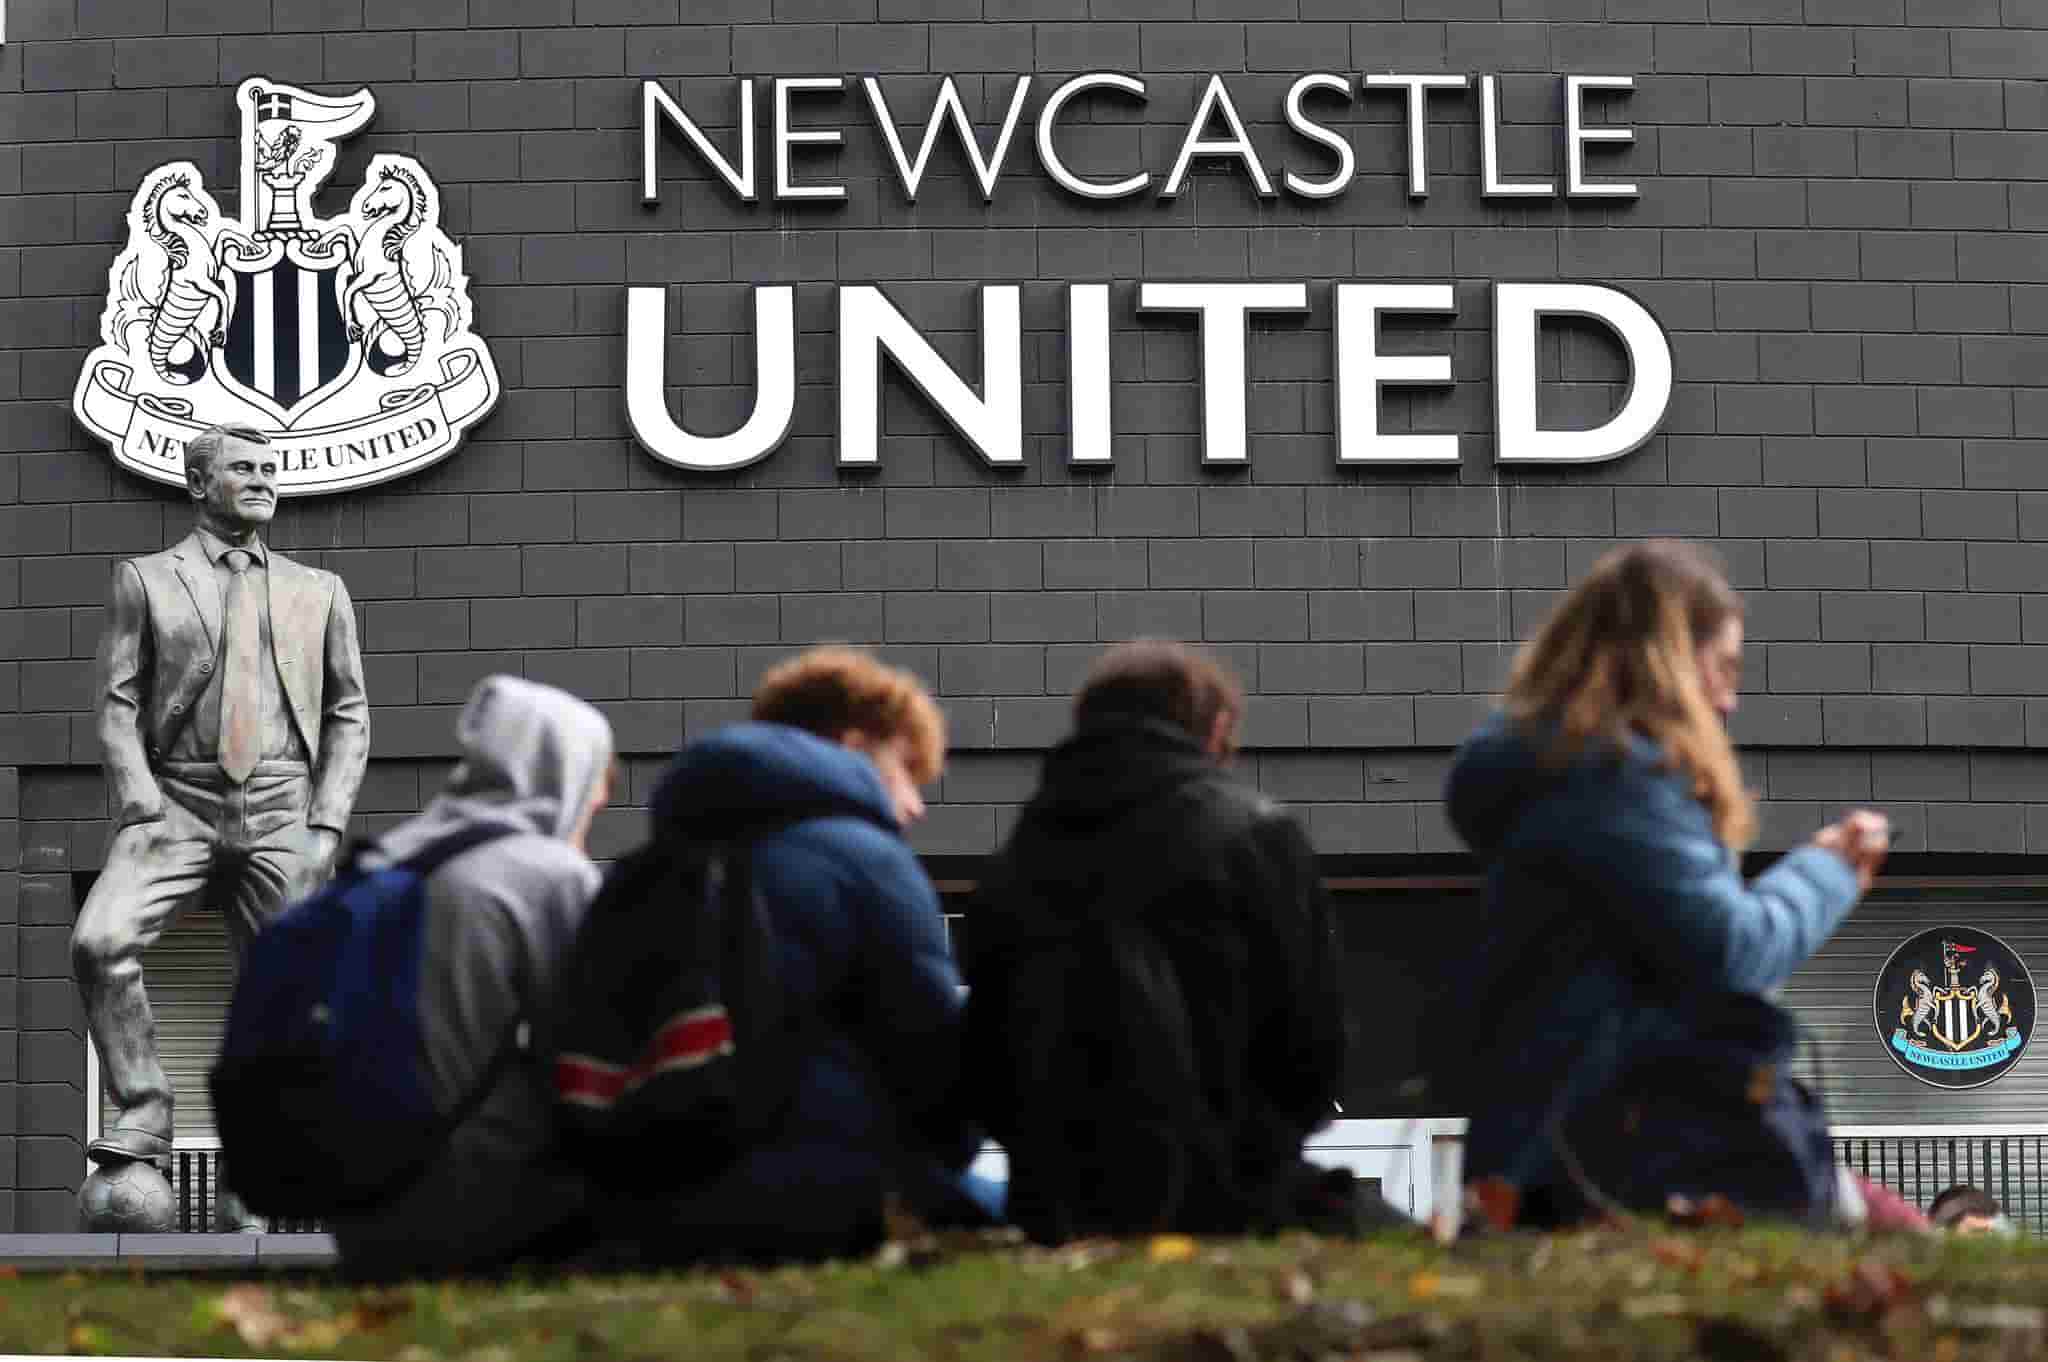 Liverpool and PL clubs opposing the Newcastle United takeover